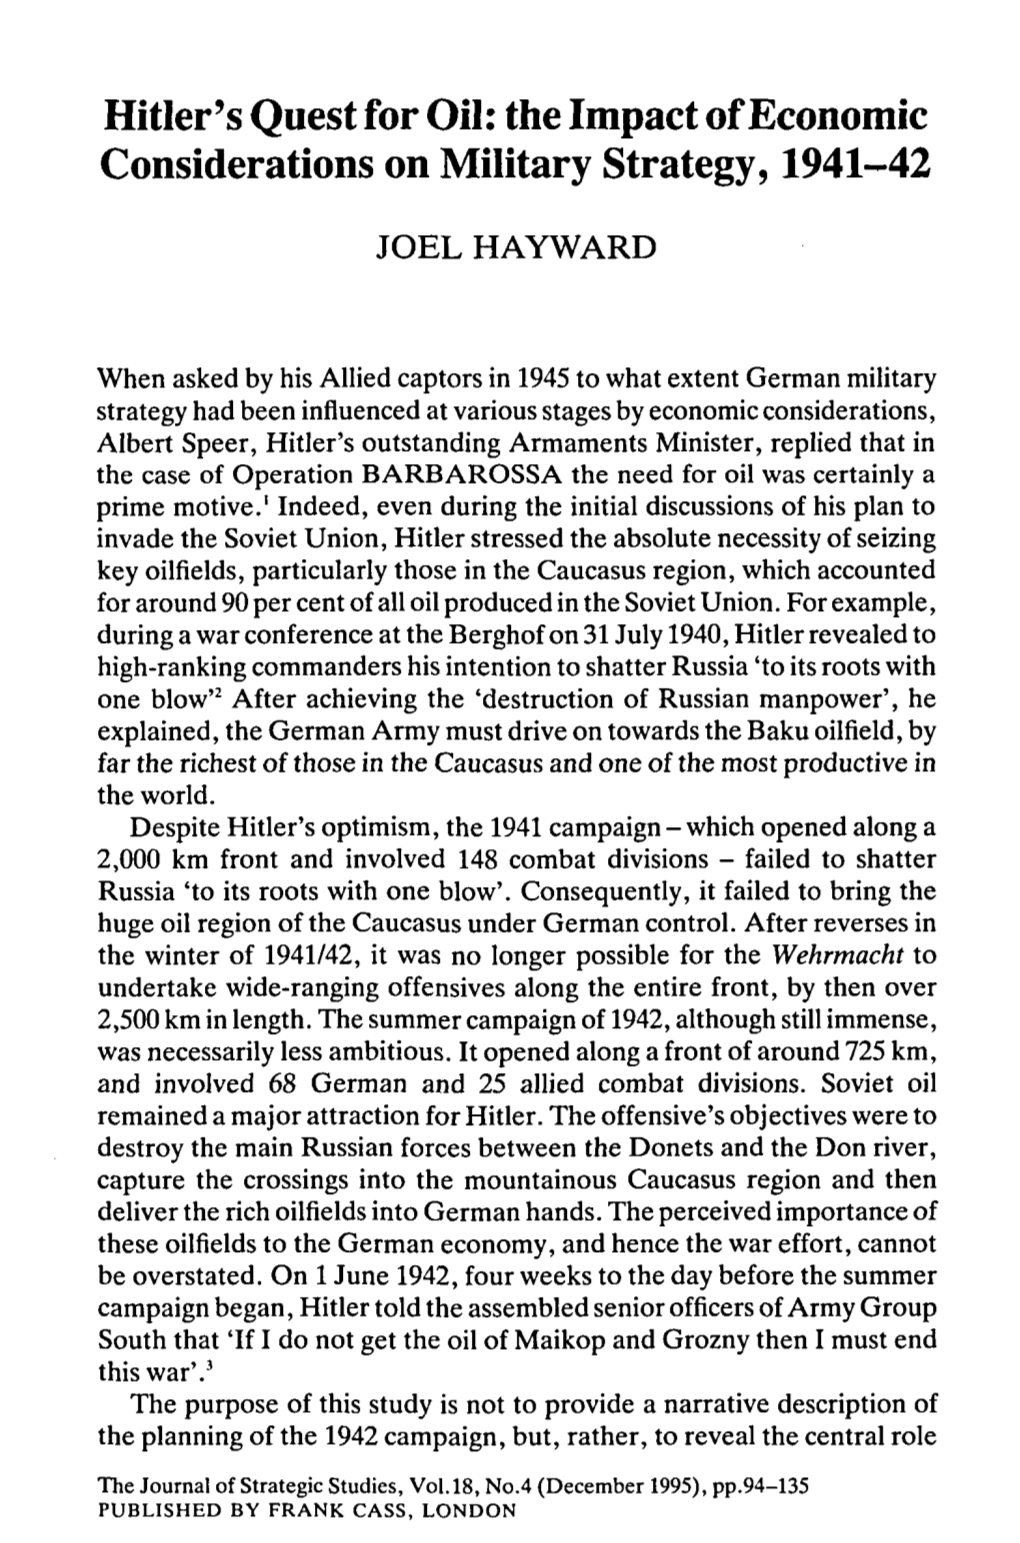 Hitler's Quest for Oil: the Impact of Economic Considerations on Military Strategy, 1941-42